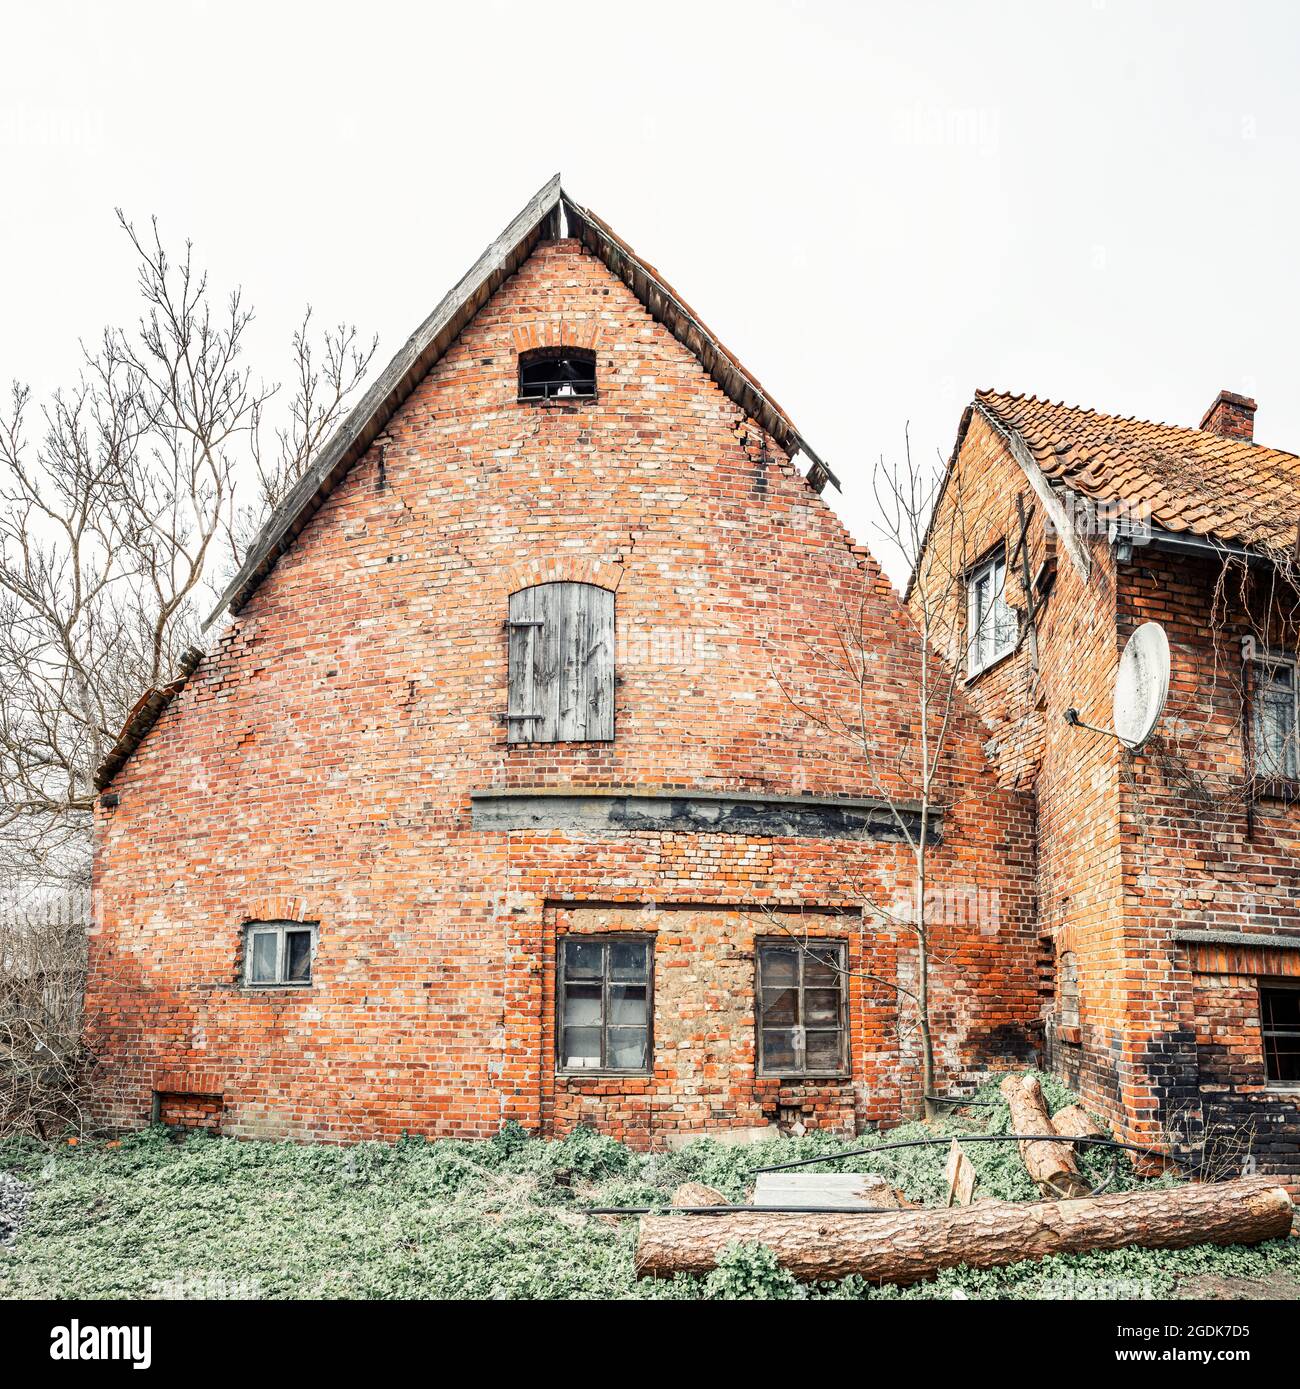 Facade of old German brick house with burnt wall in poor condition Stock Photo